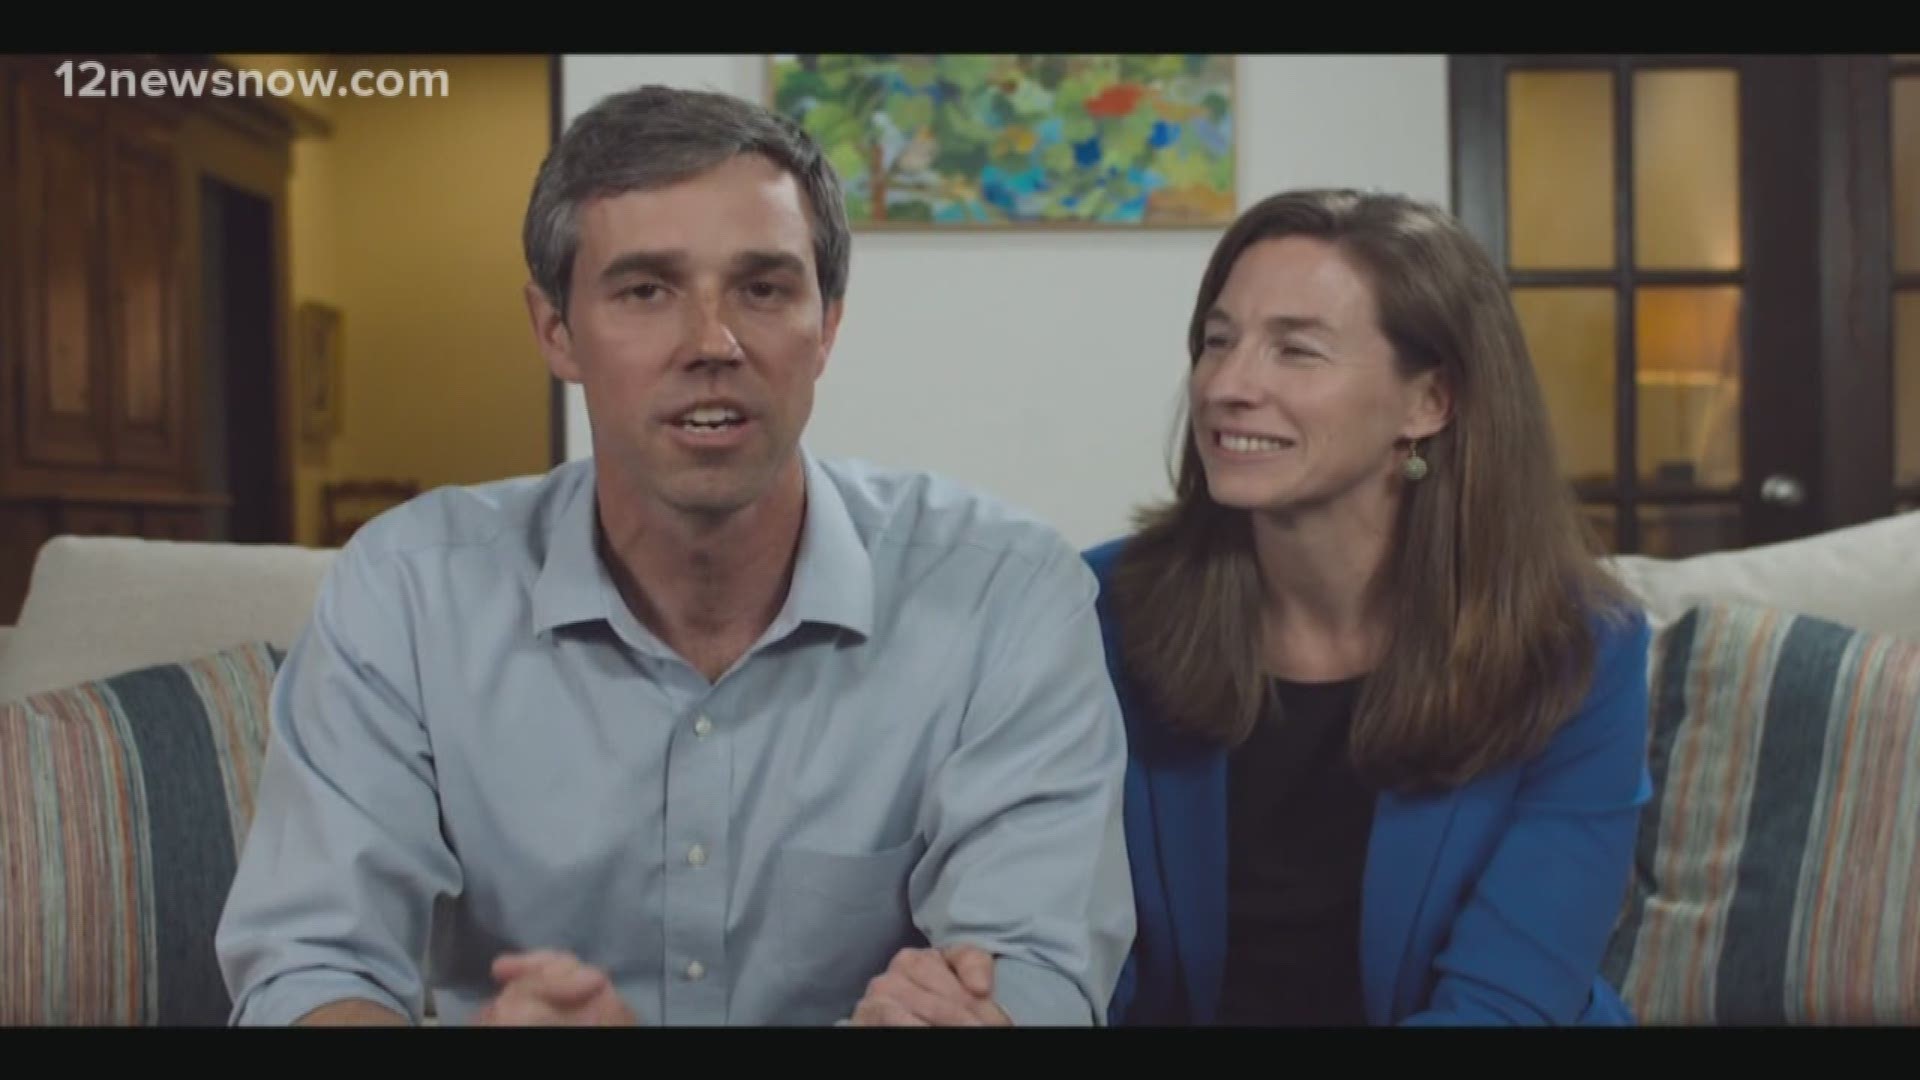 O'Rourke visited cafes in Iowa on Thursday.